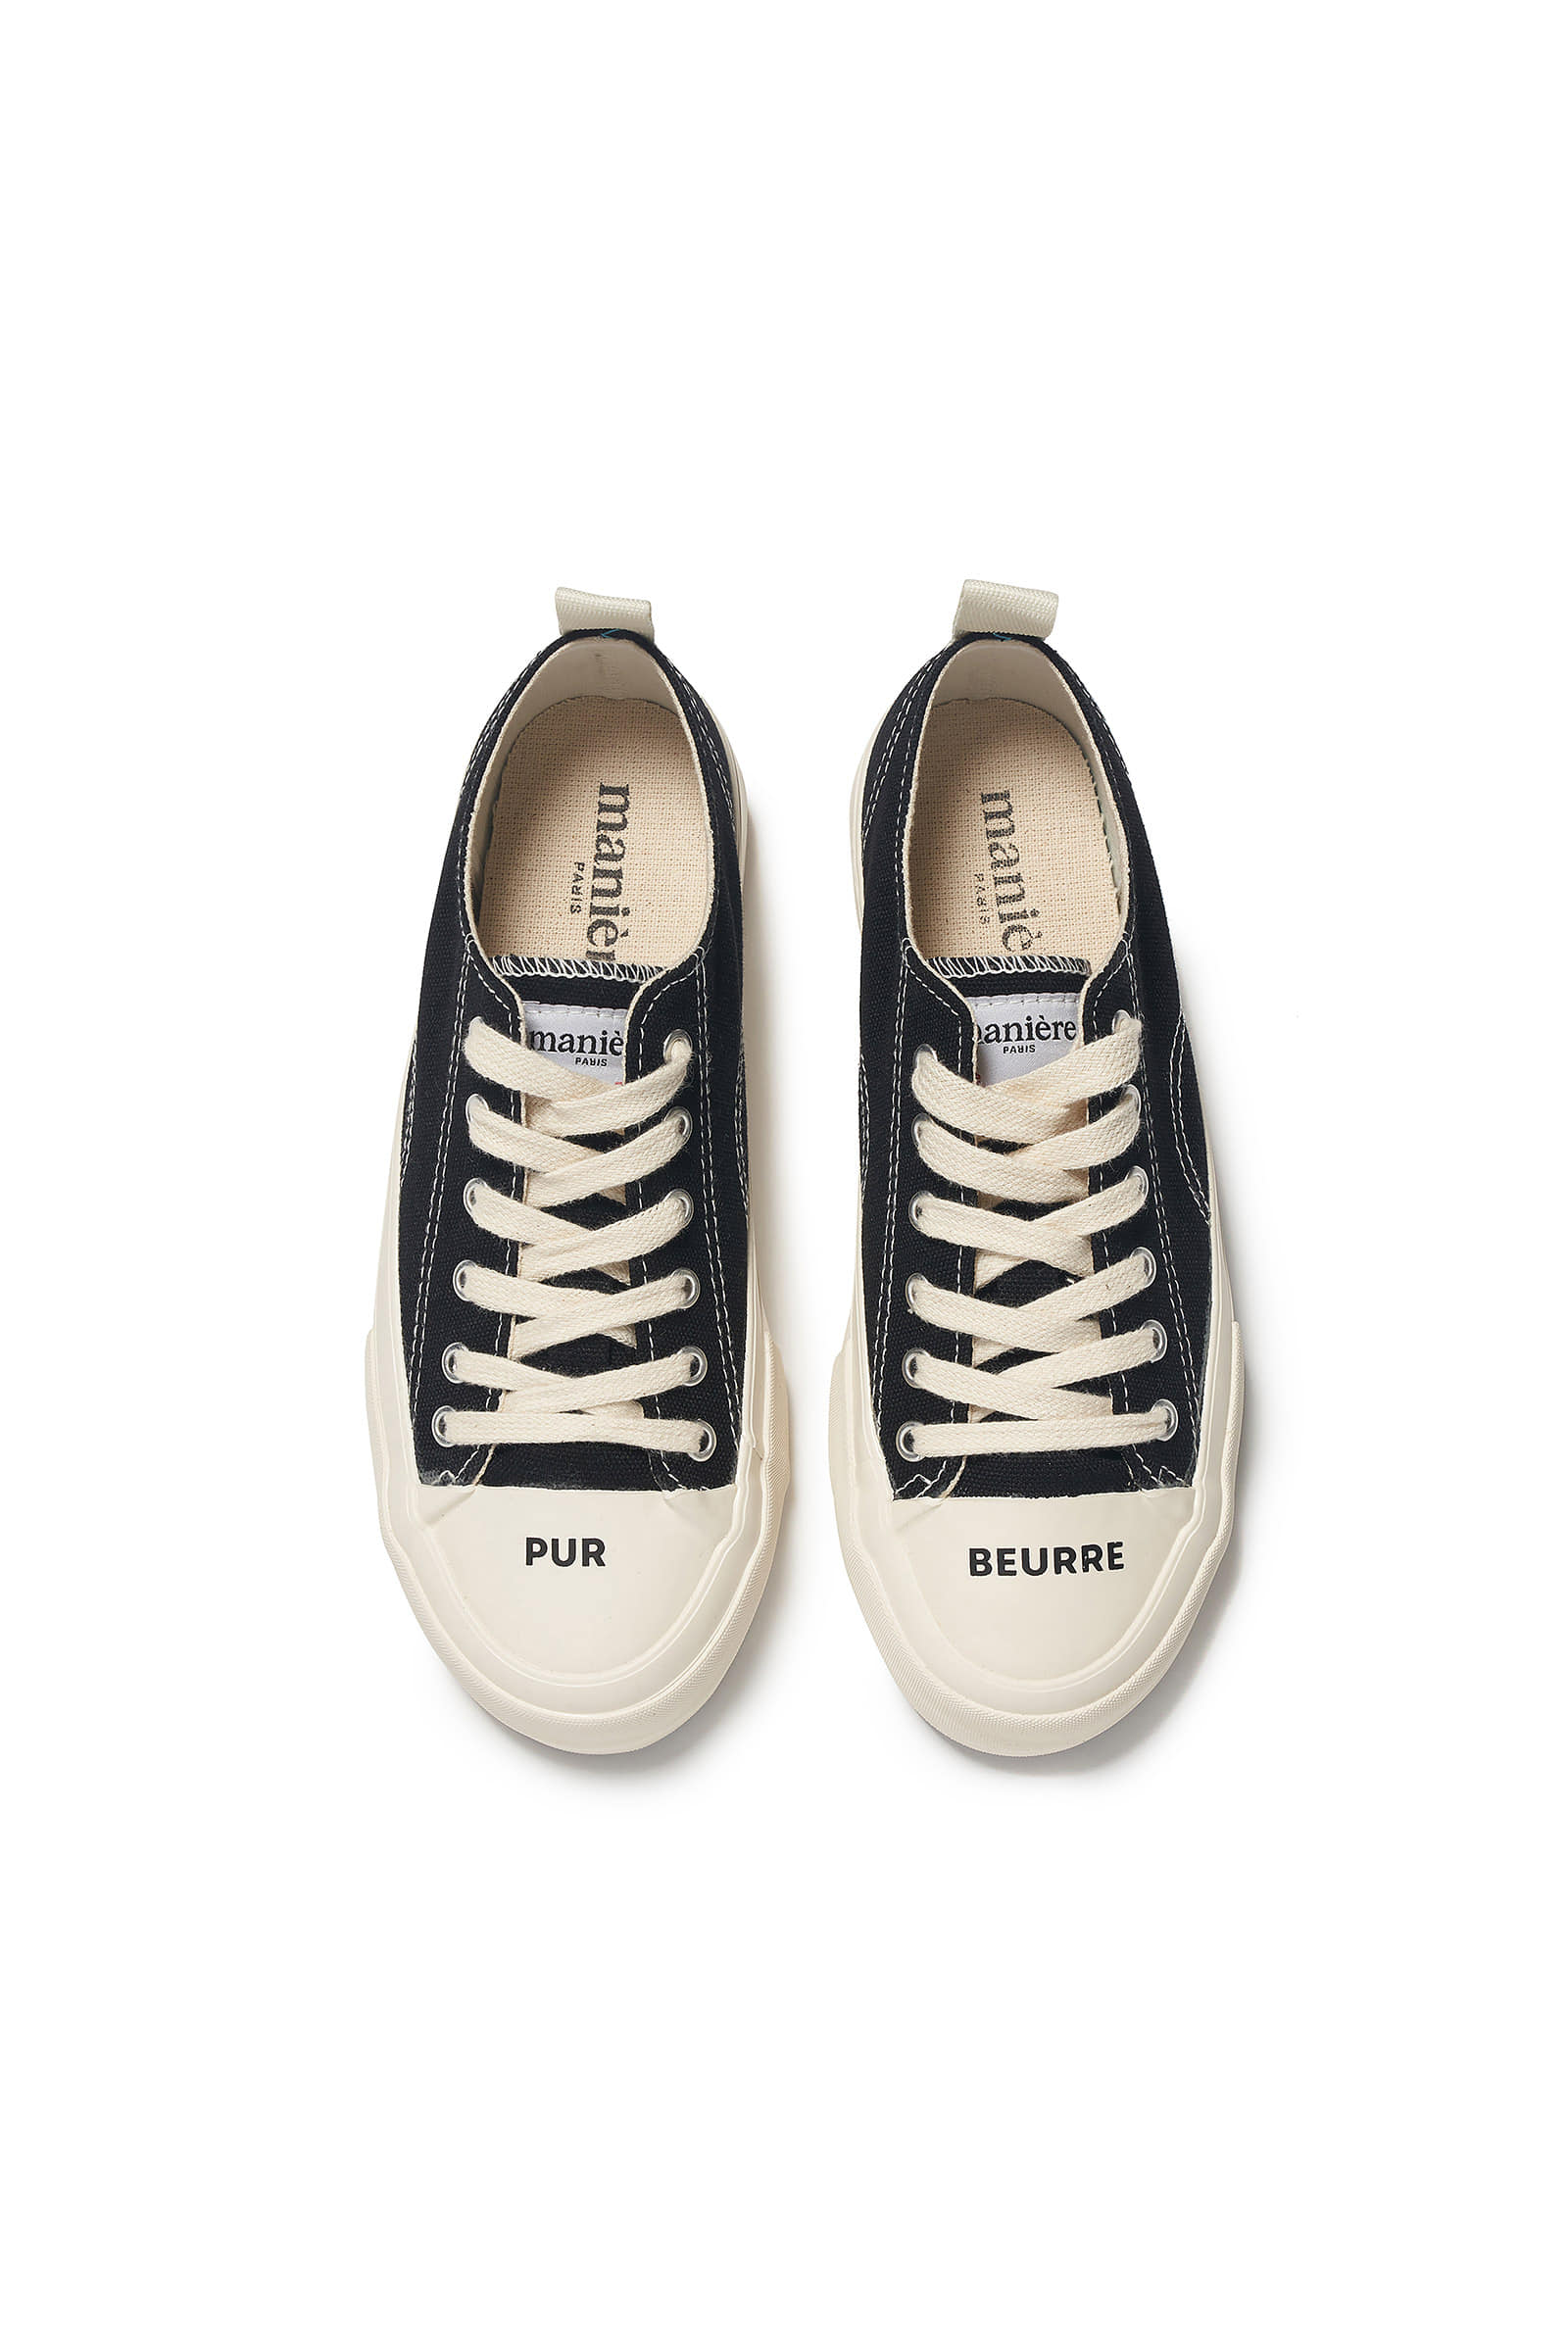 ep.2 Pur Beurre Sneakers(Black)